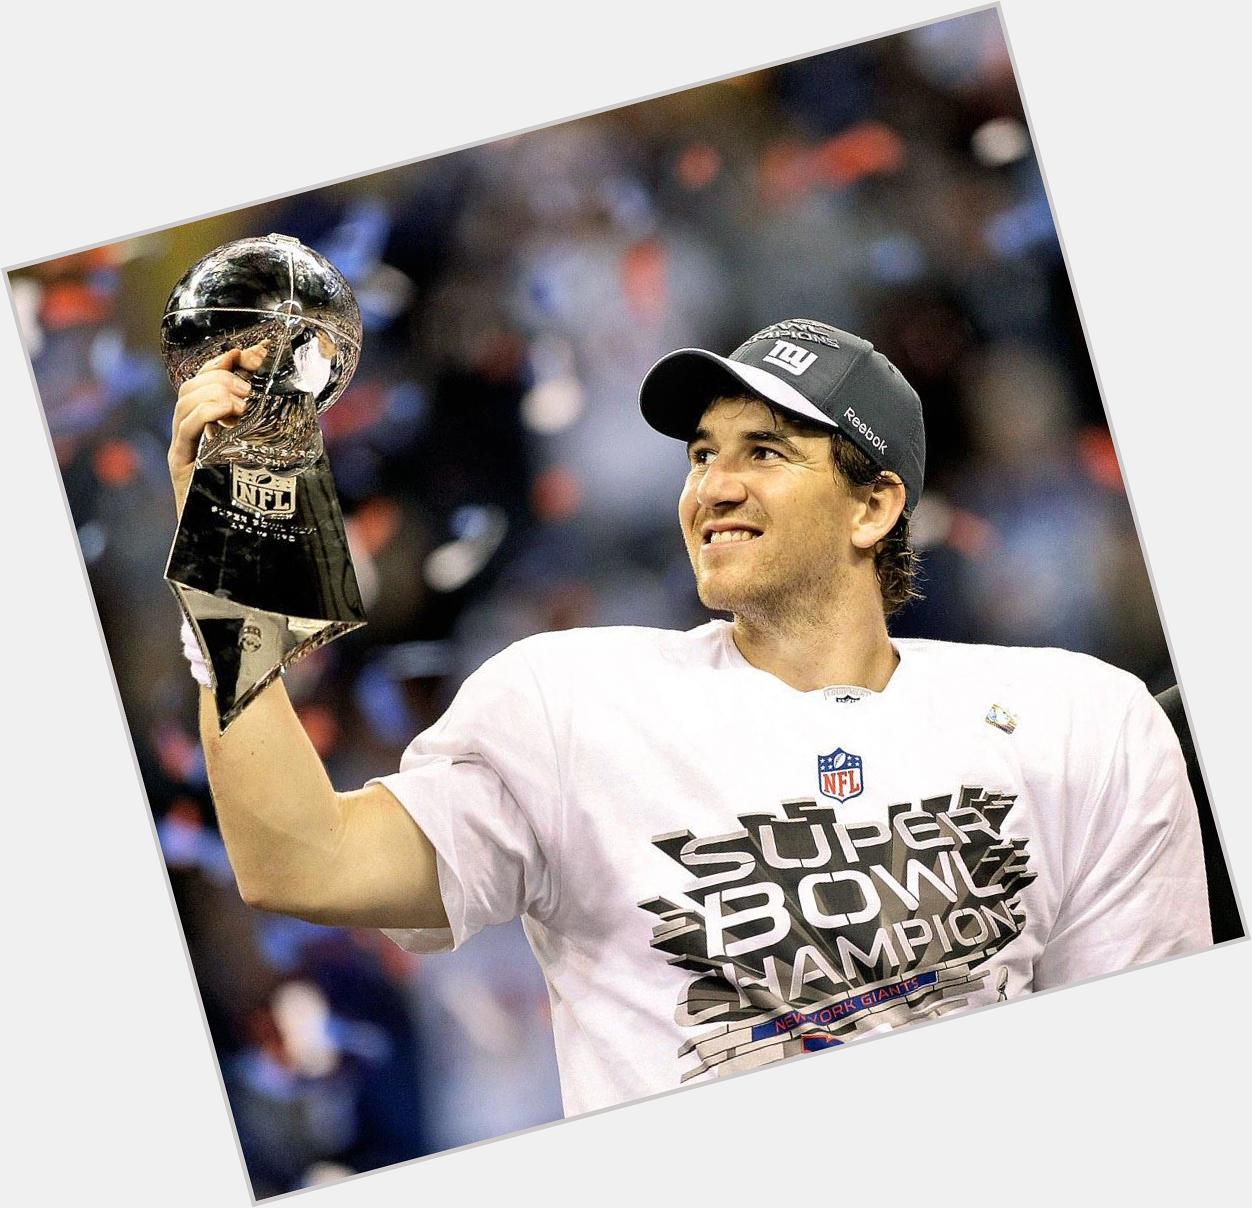 Happy birthday my QB, the super bowl winning Eli Manning. To many more years of success with the giants!! 